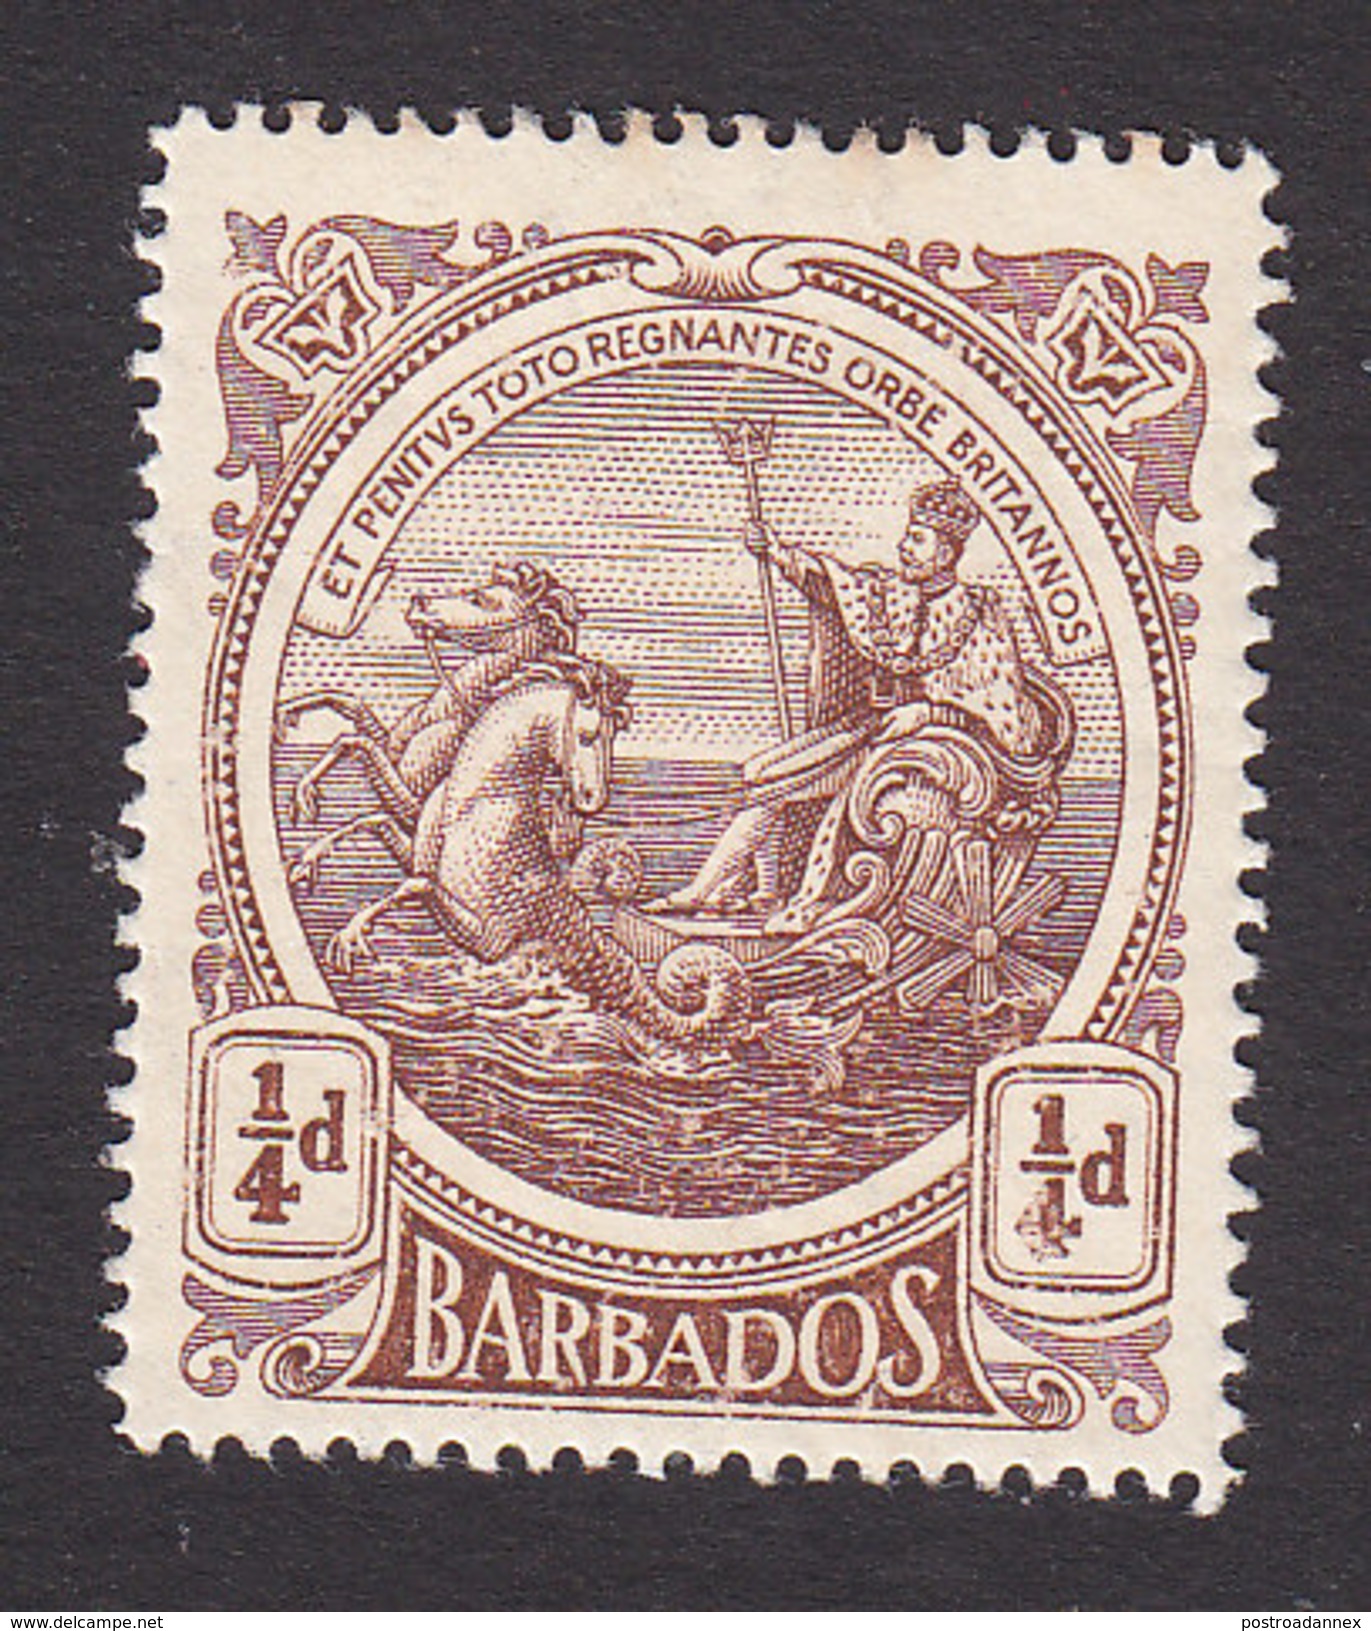 Barbados, Scott #127, Mint Hinged, Seal Of The Colony, Issued 1916 - Barbados (...-1966)